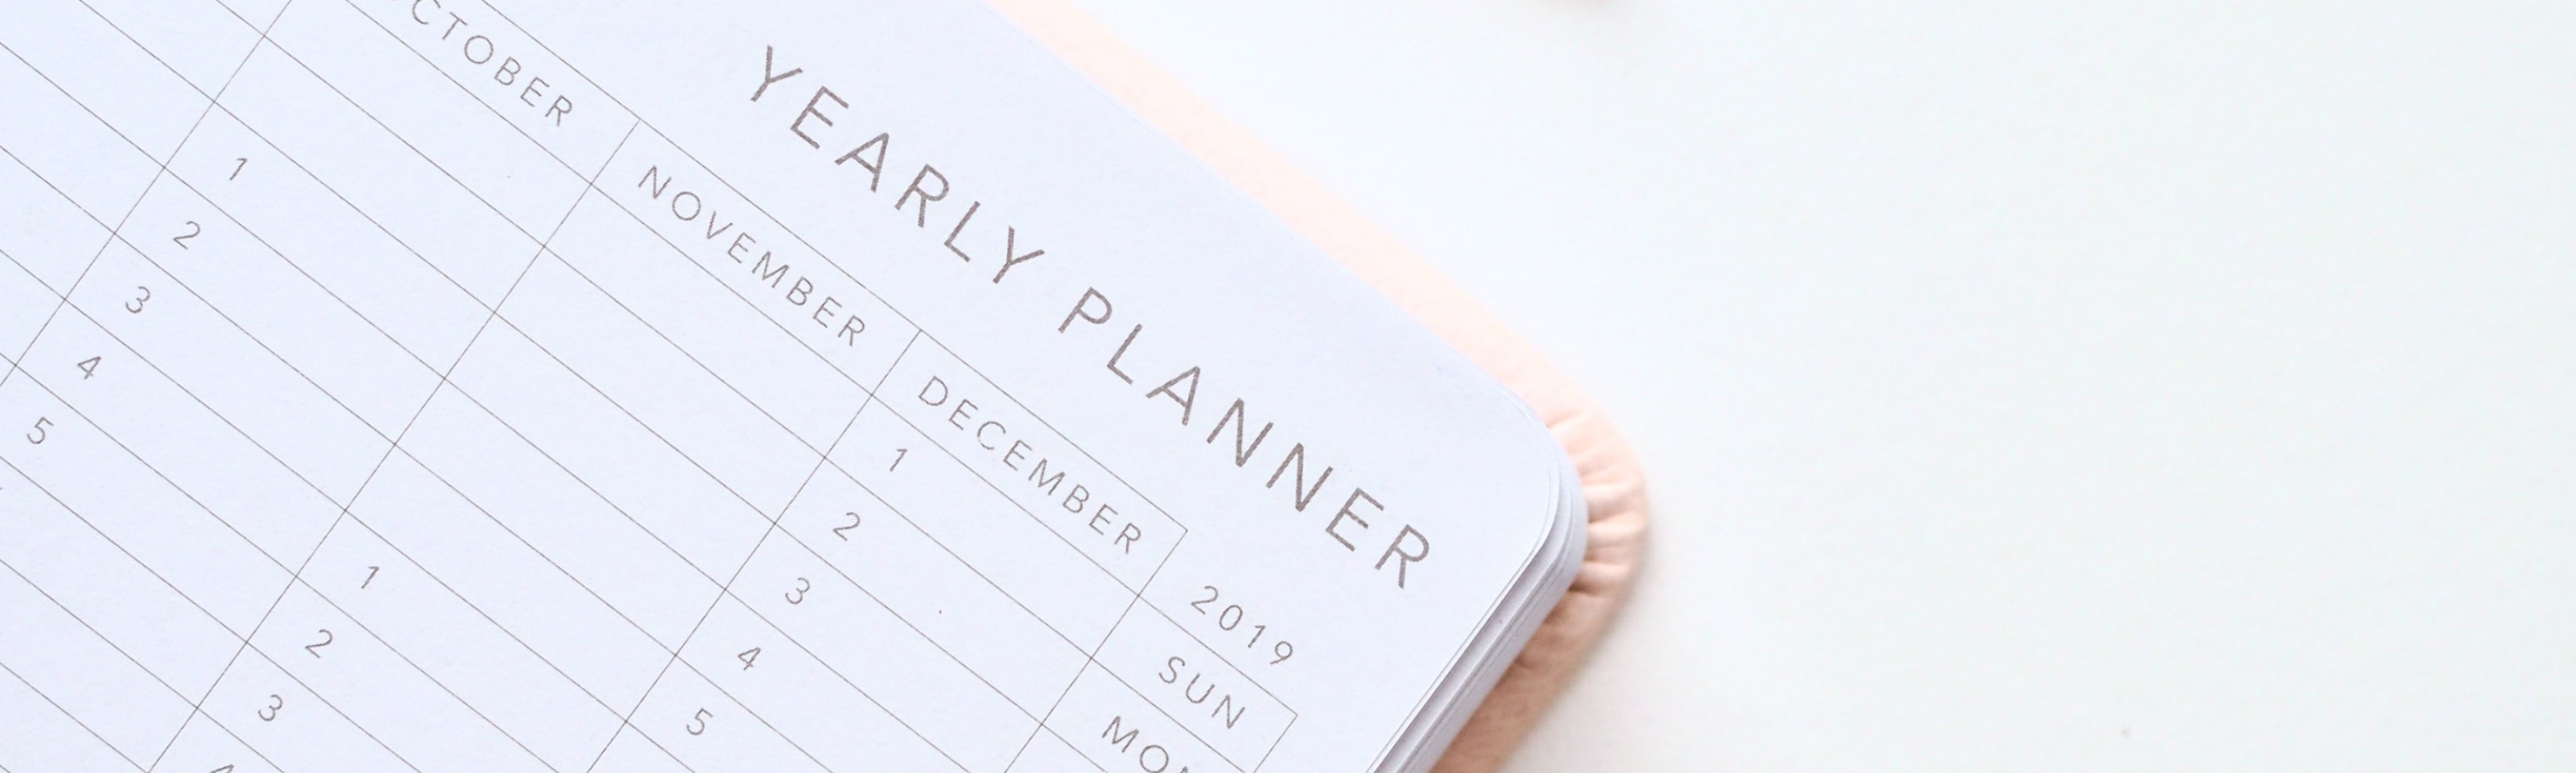 Yearly planner with pen